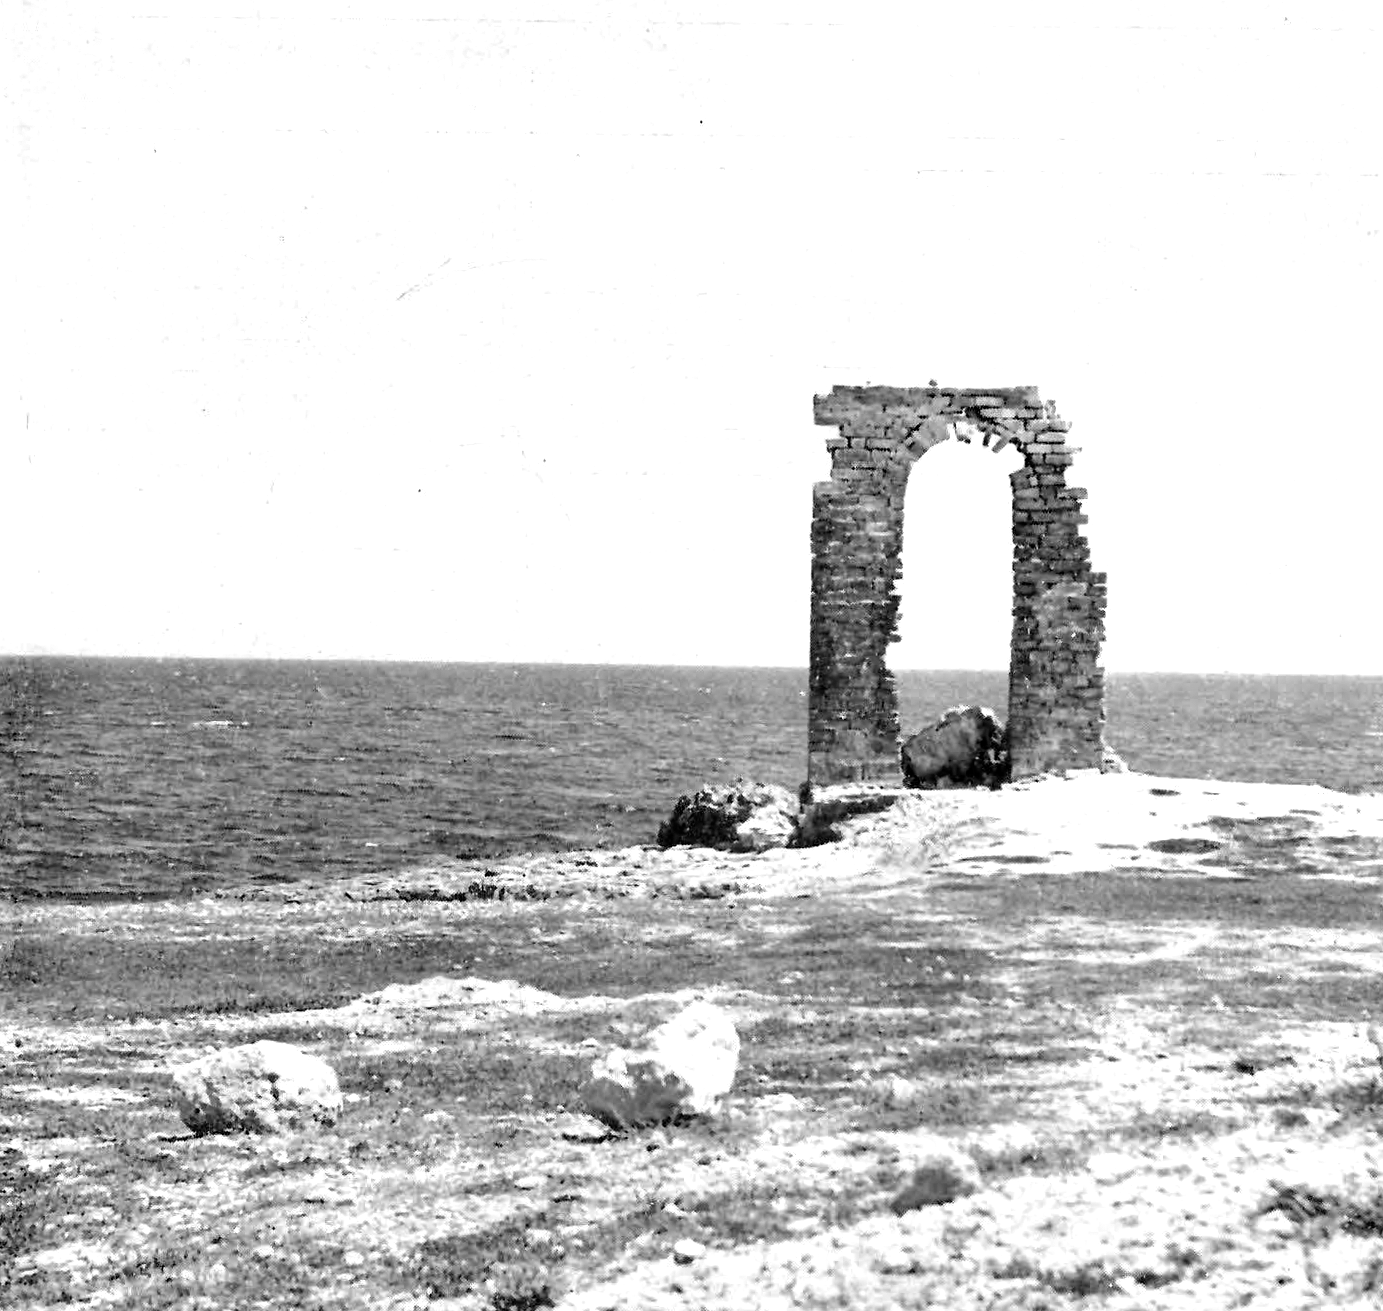 Figure 5: A crumbling stone archway sits on a coastal peninsula with the Mediterranean Sea in the background. According to Alexandre Lézine, this structure was constructed by the Normans during their occupation of Mahdia.